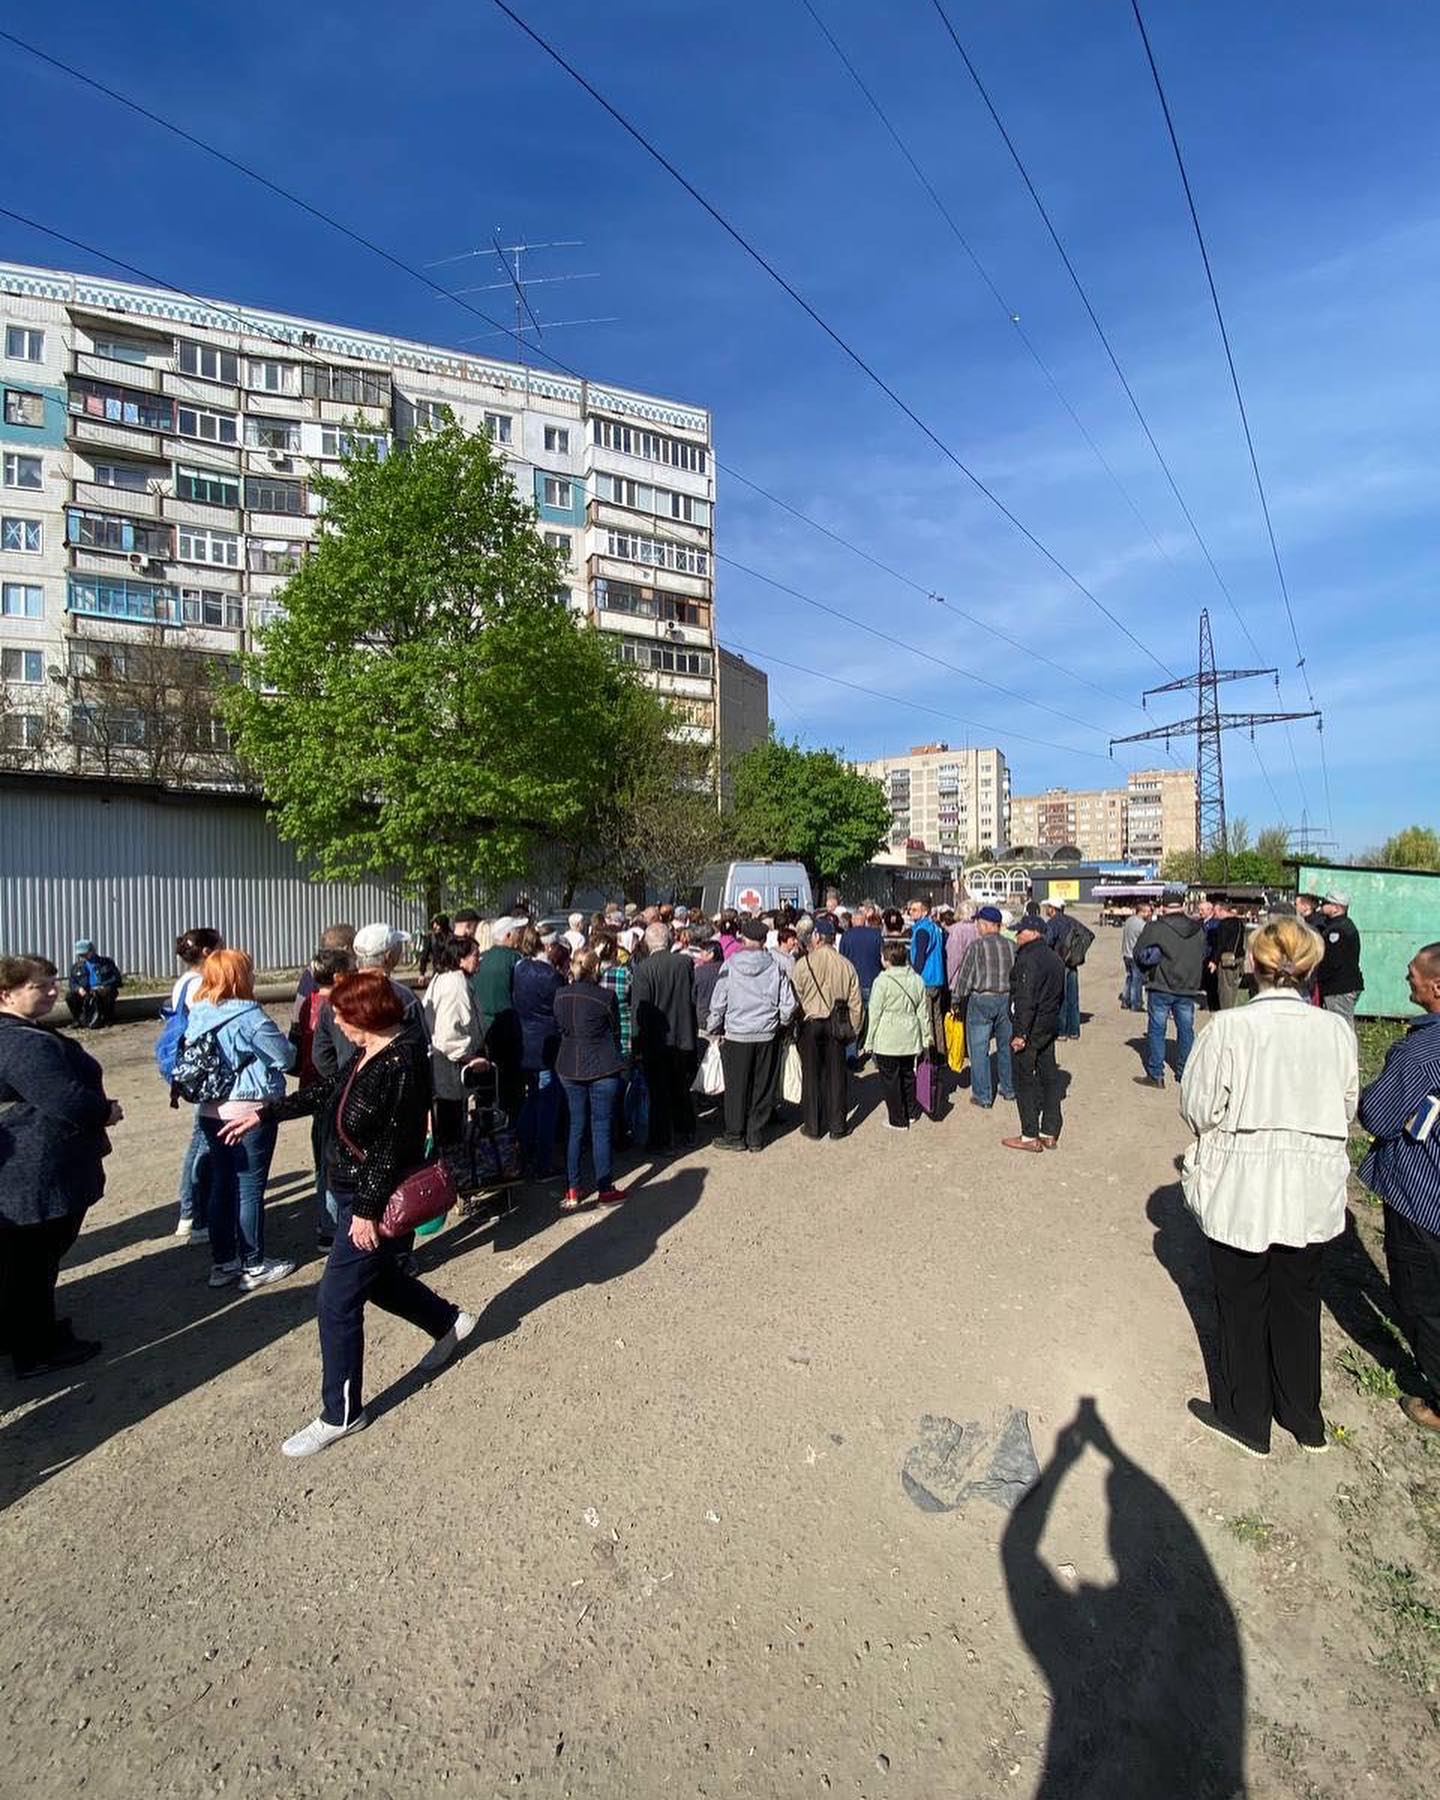 Crowd of people waiting in a line on a dirt path with residential buildings in the background under a clear sky, hoping for Ukraine aid support.